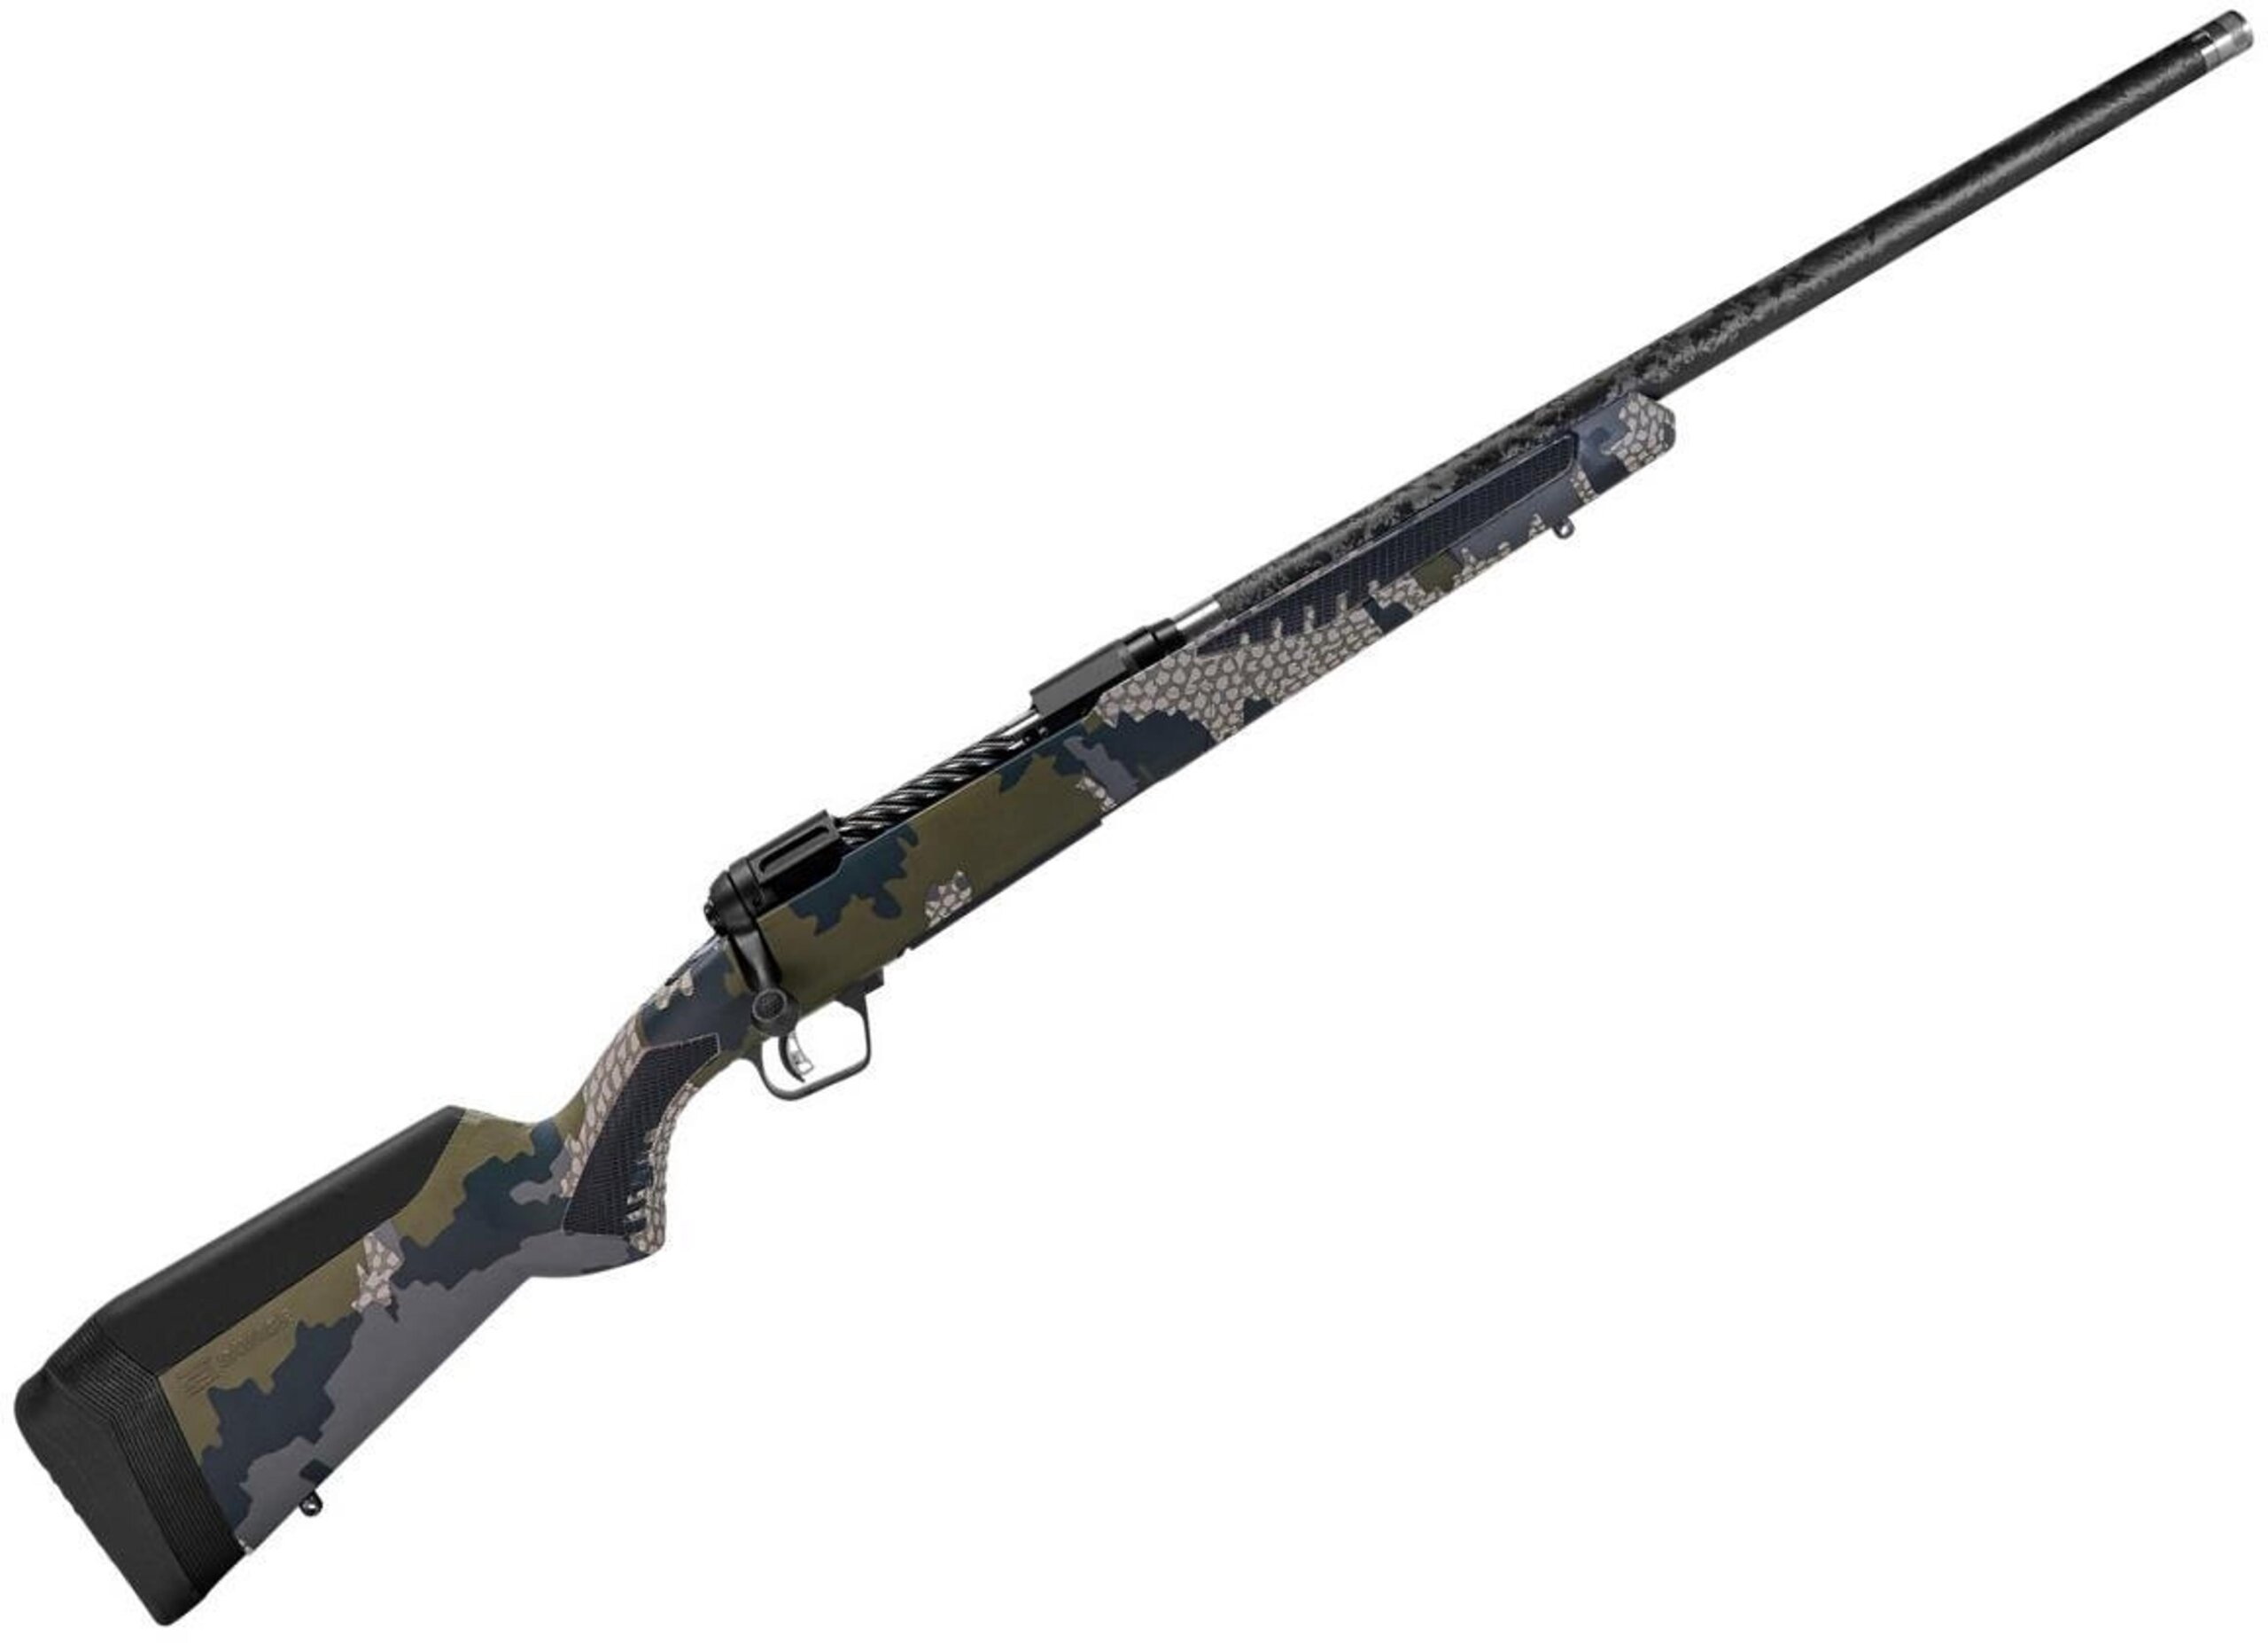 Savage 58020 110 Ultralite Camo 6.5 PRC 24 in Black Carbon Fiber BBL, Camouflage Savage Woodland Camo Synthetic Stock, 0685-2638